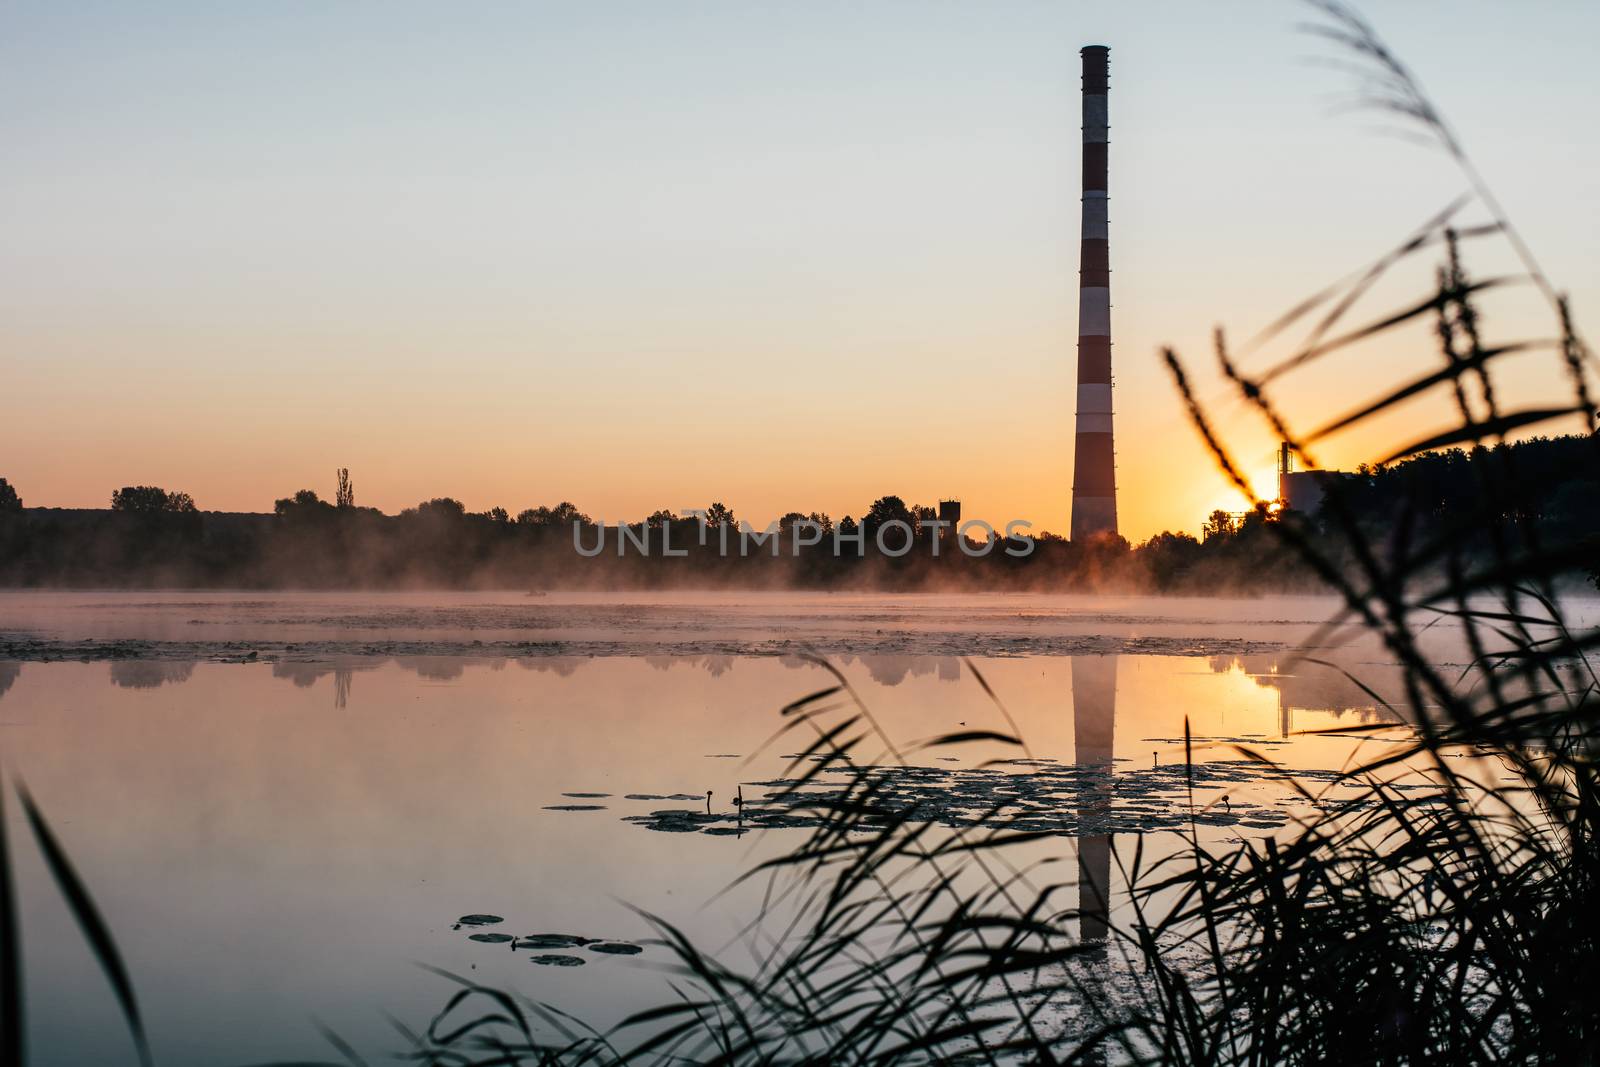 sunrise over the lake and a factory chimney